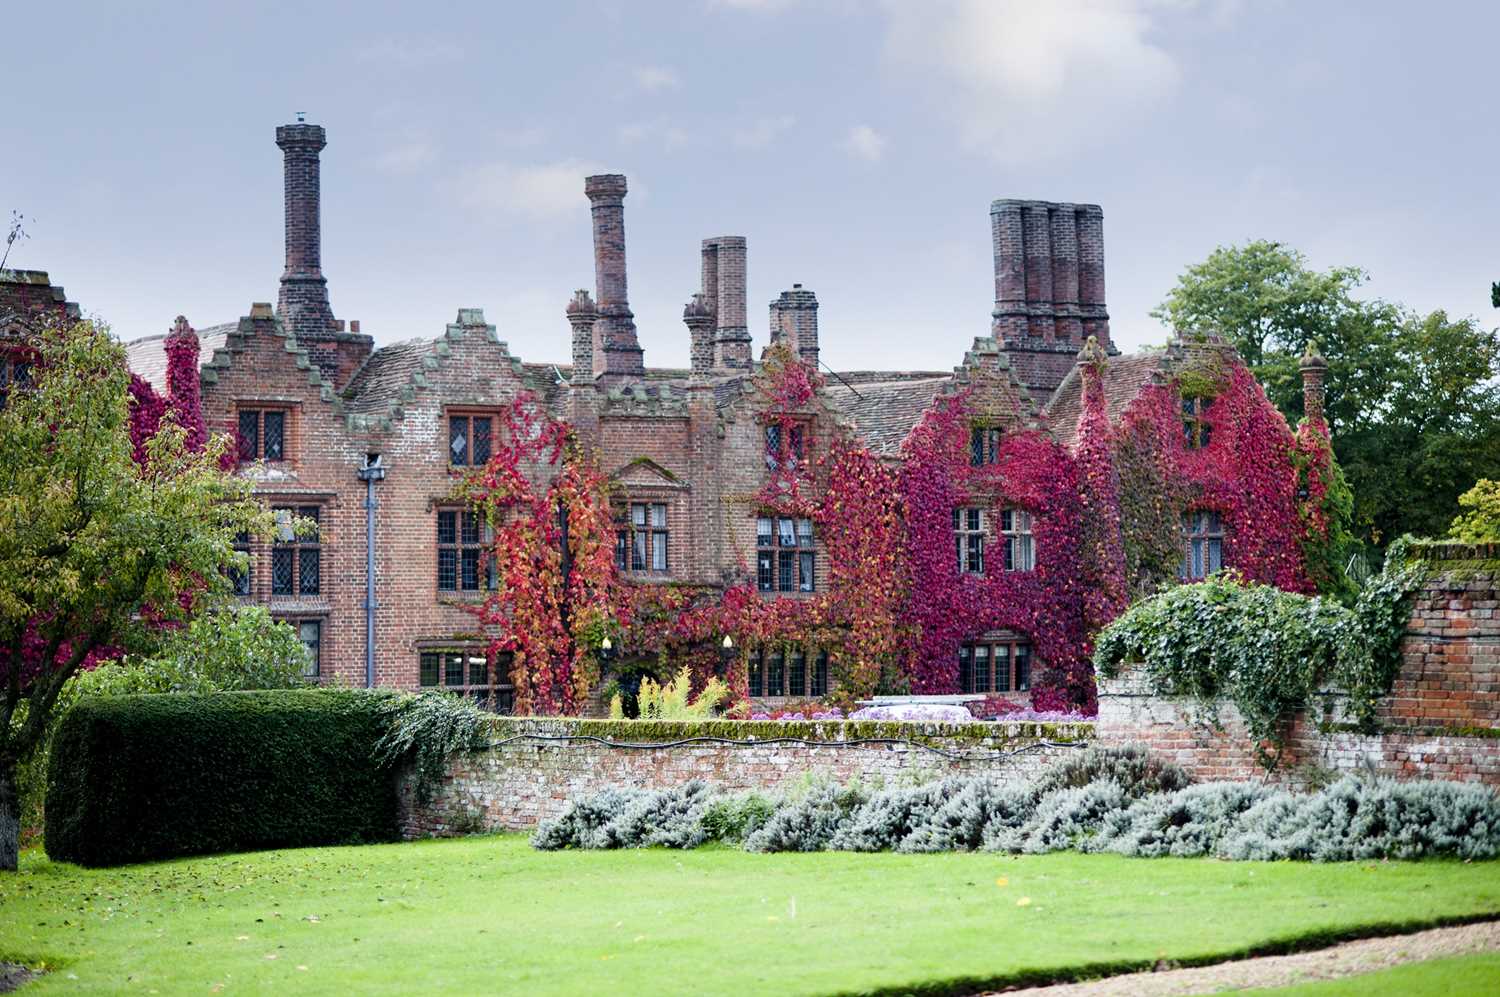 A Luxury Overnight Break with Dinner for 2 at Seckford Hall, Woodbridge, Suffolk  Discover the